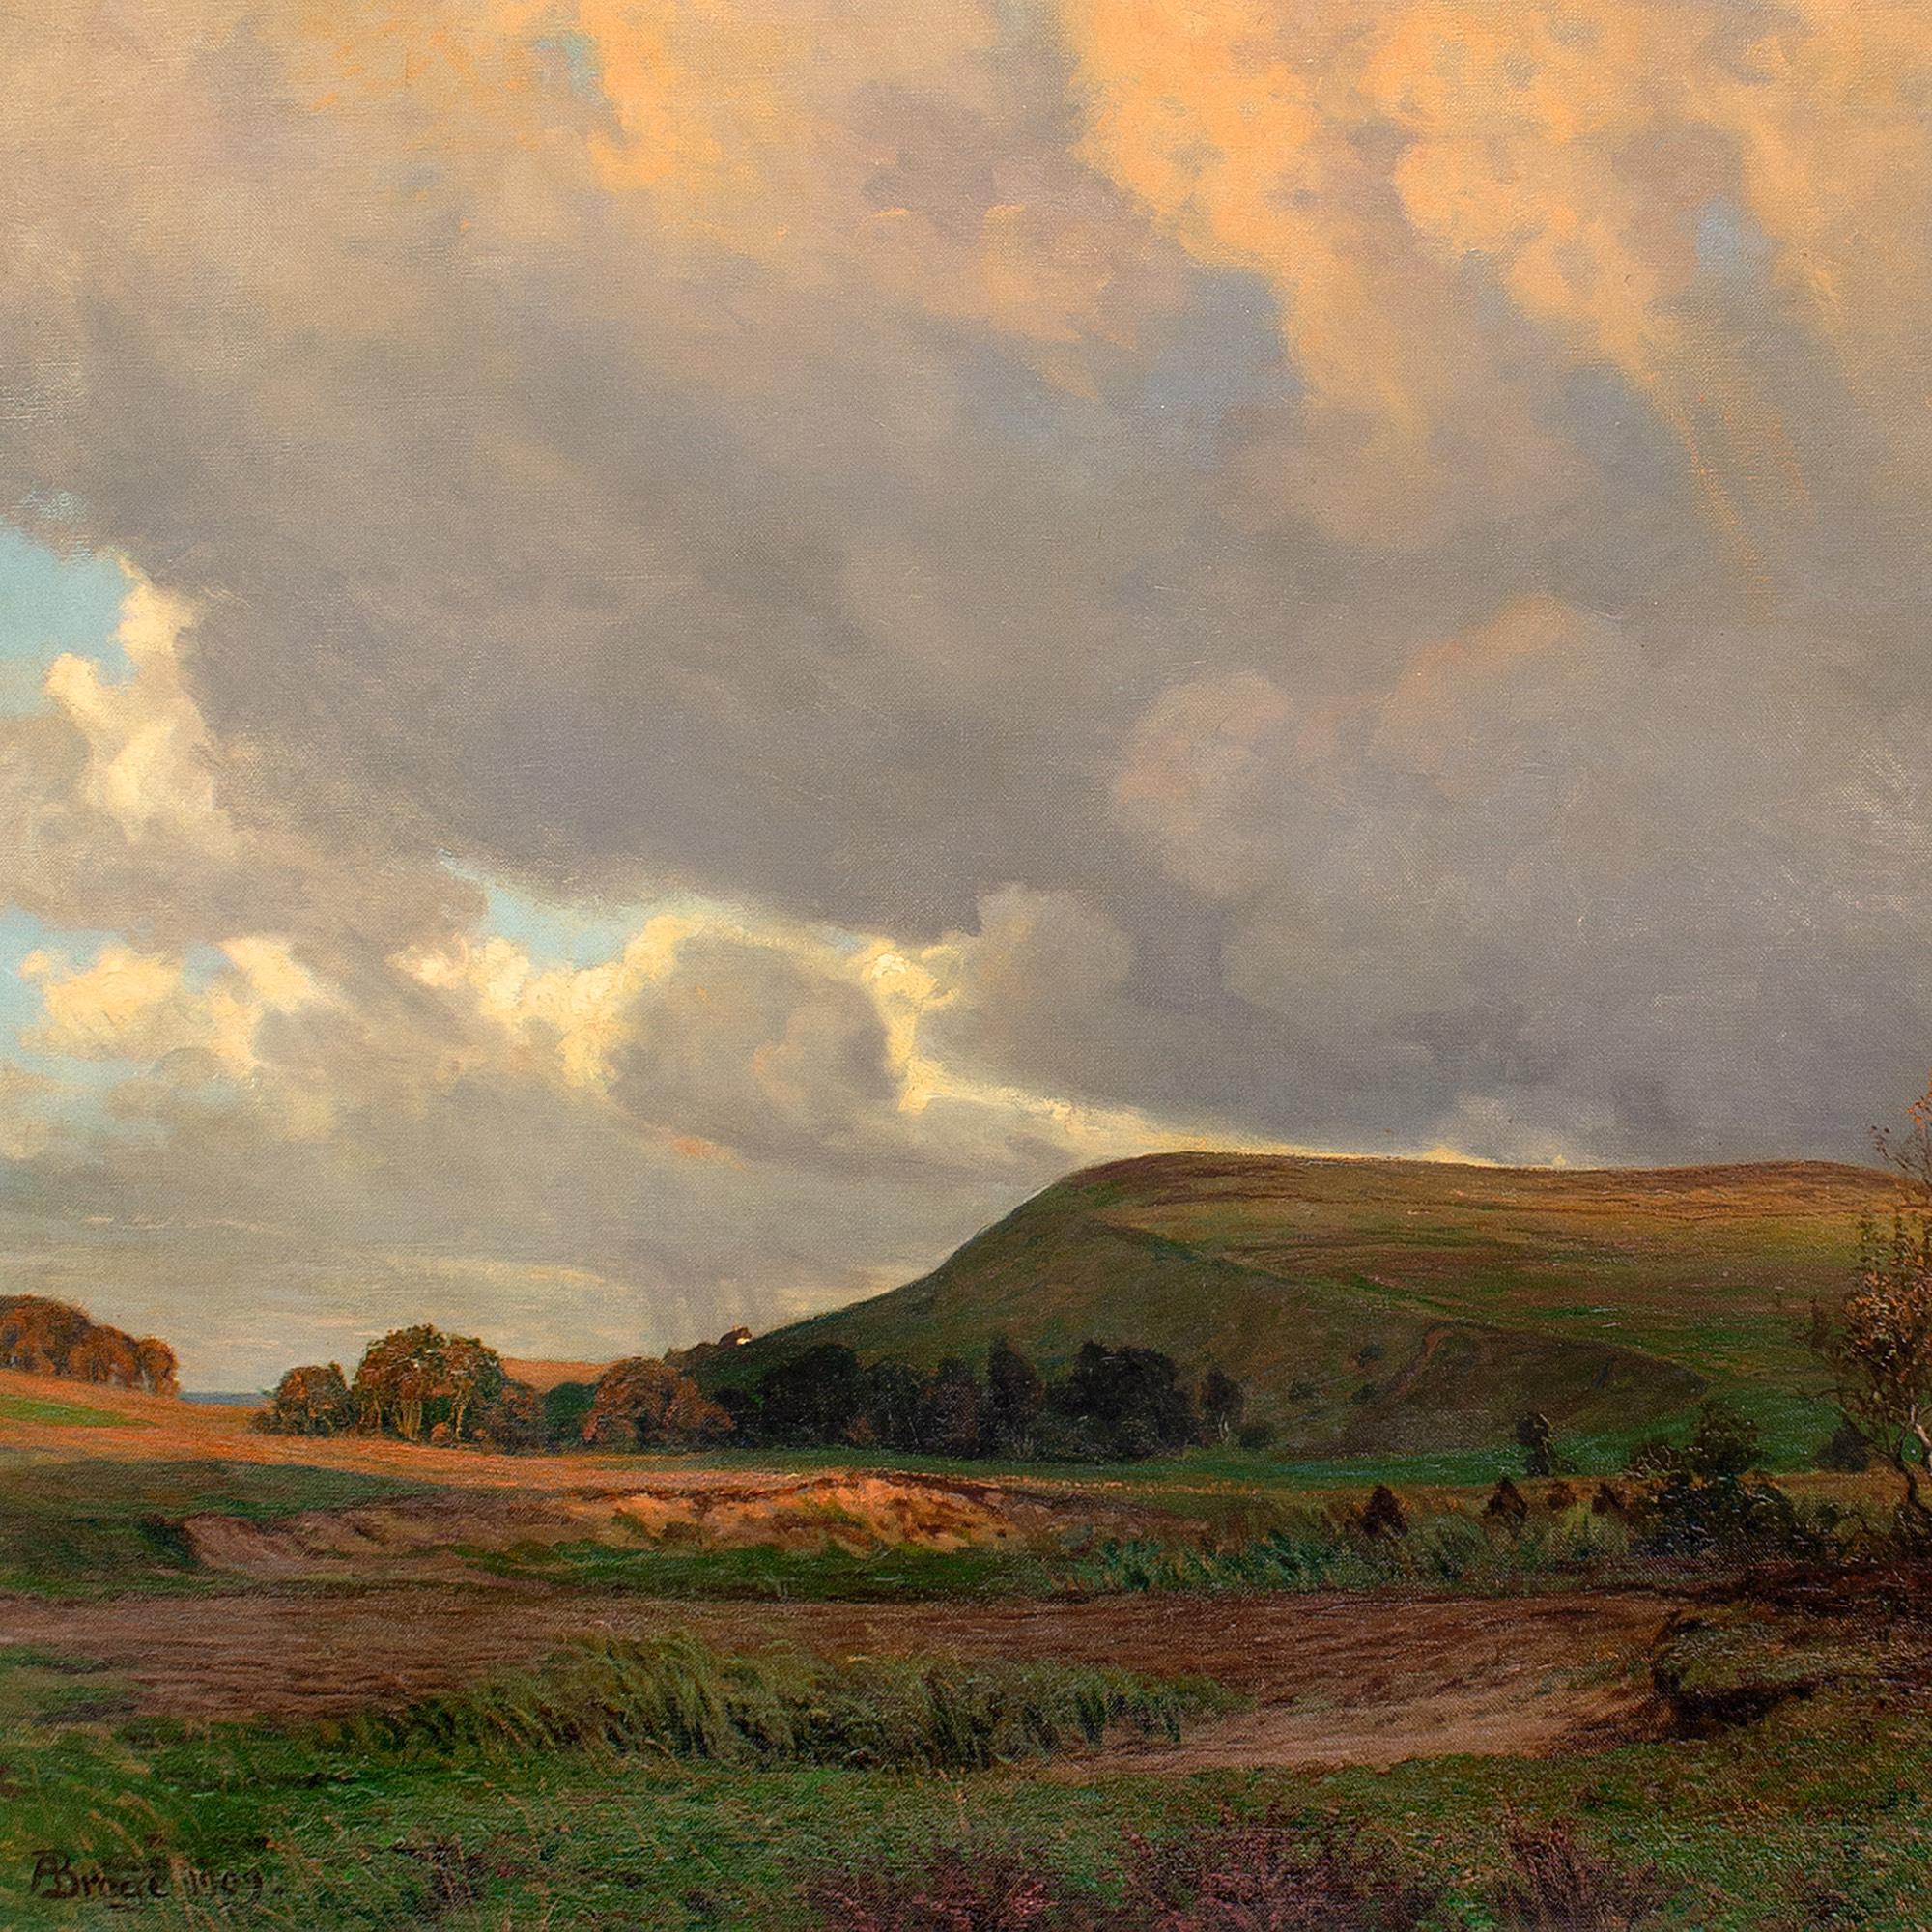 This early 20th-century oil painting by Danish artist Alfred Broge (1870-1955) depicts a dramatic sky over Arrenakke Bakke, Denmark.

Moments after heavy rainfall, the light conjures a dark orange glow transforming the Autumnal plains into